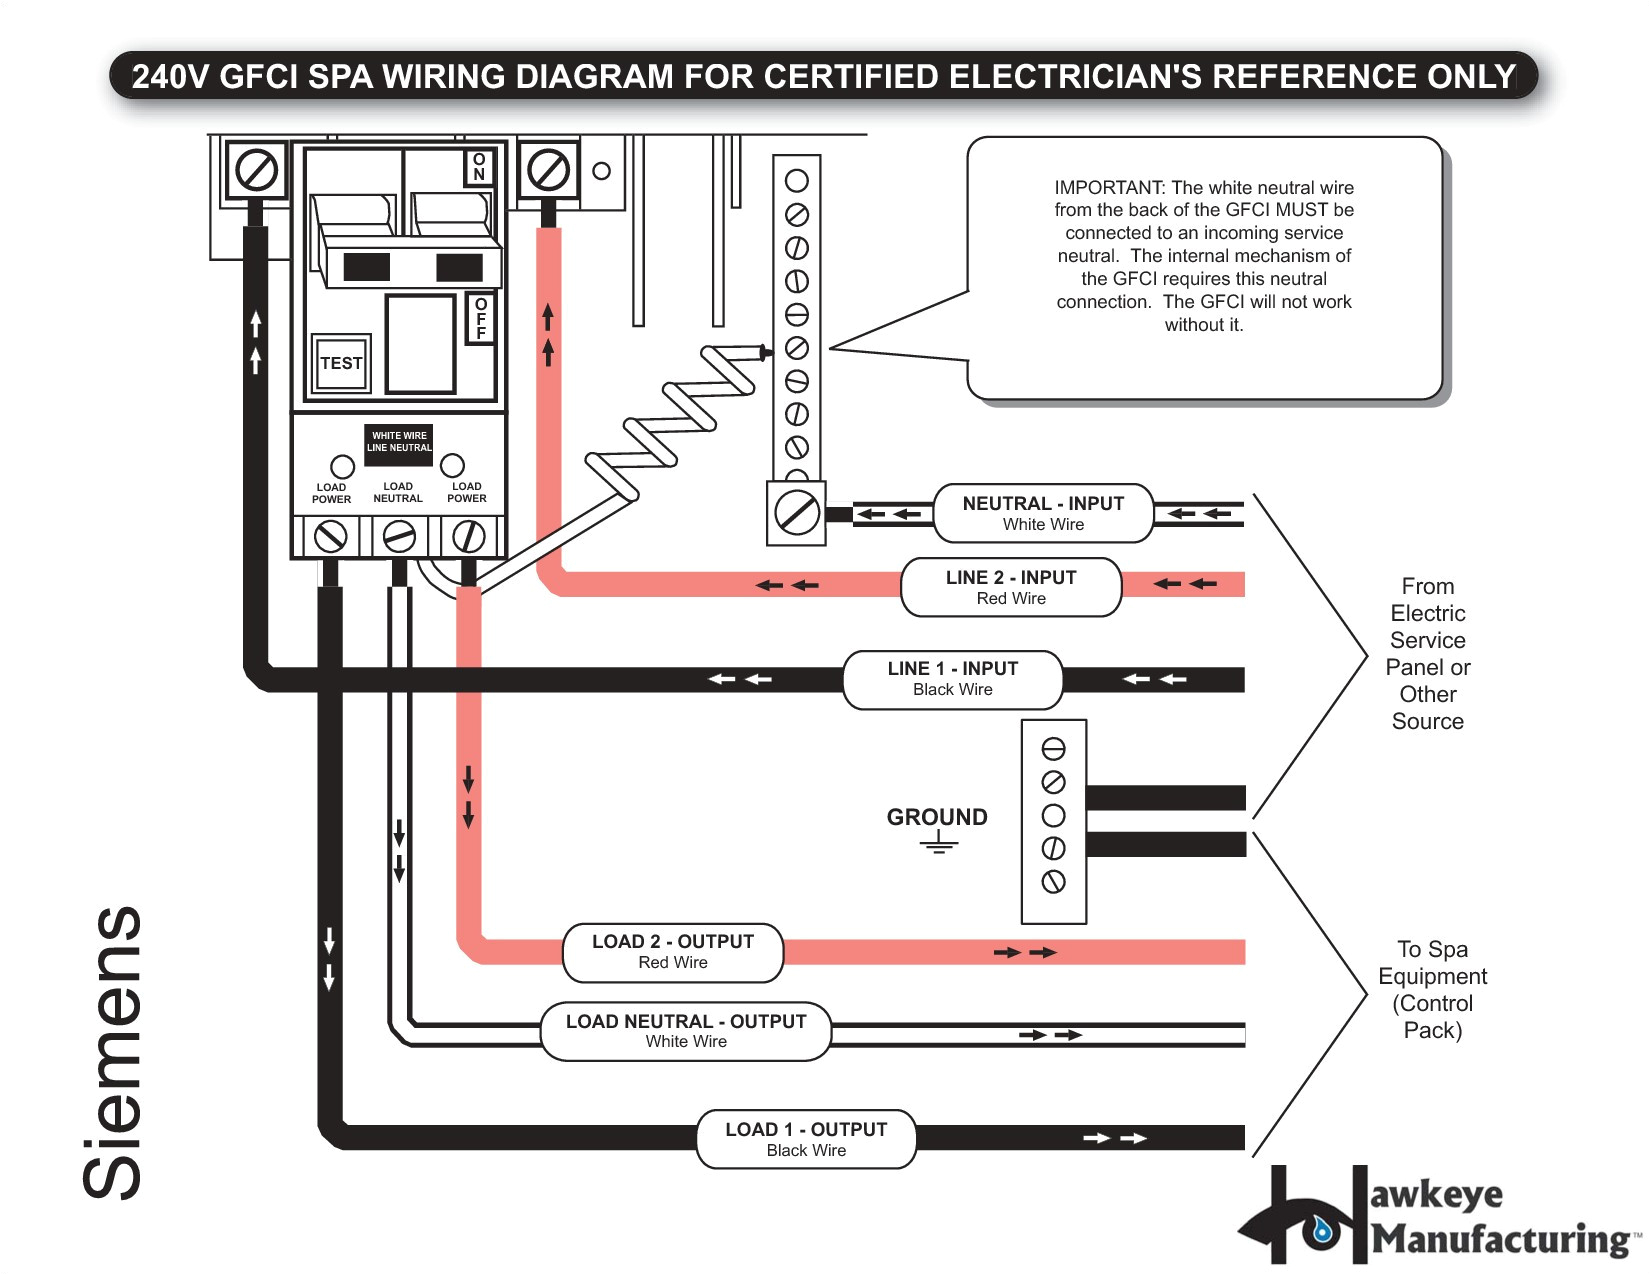 charger circuit diagram on 3 pole circuit breaker schematic diagram 3 pole schematic wiring